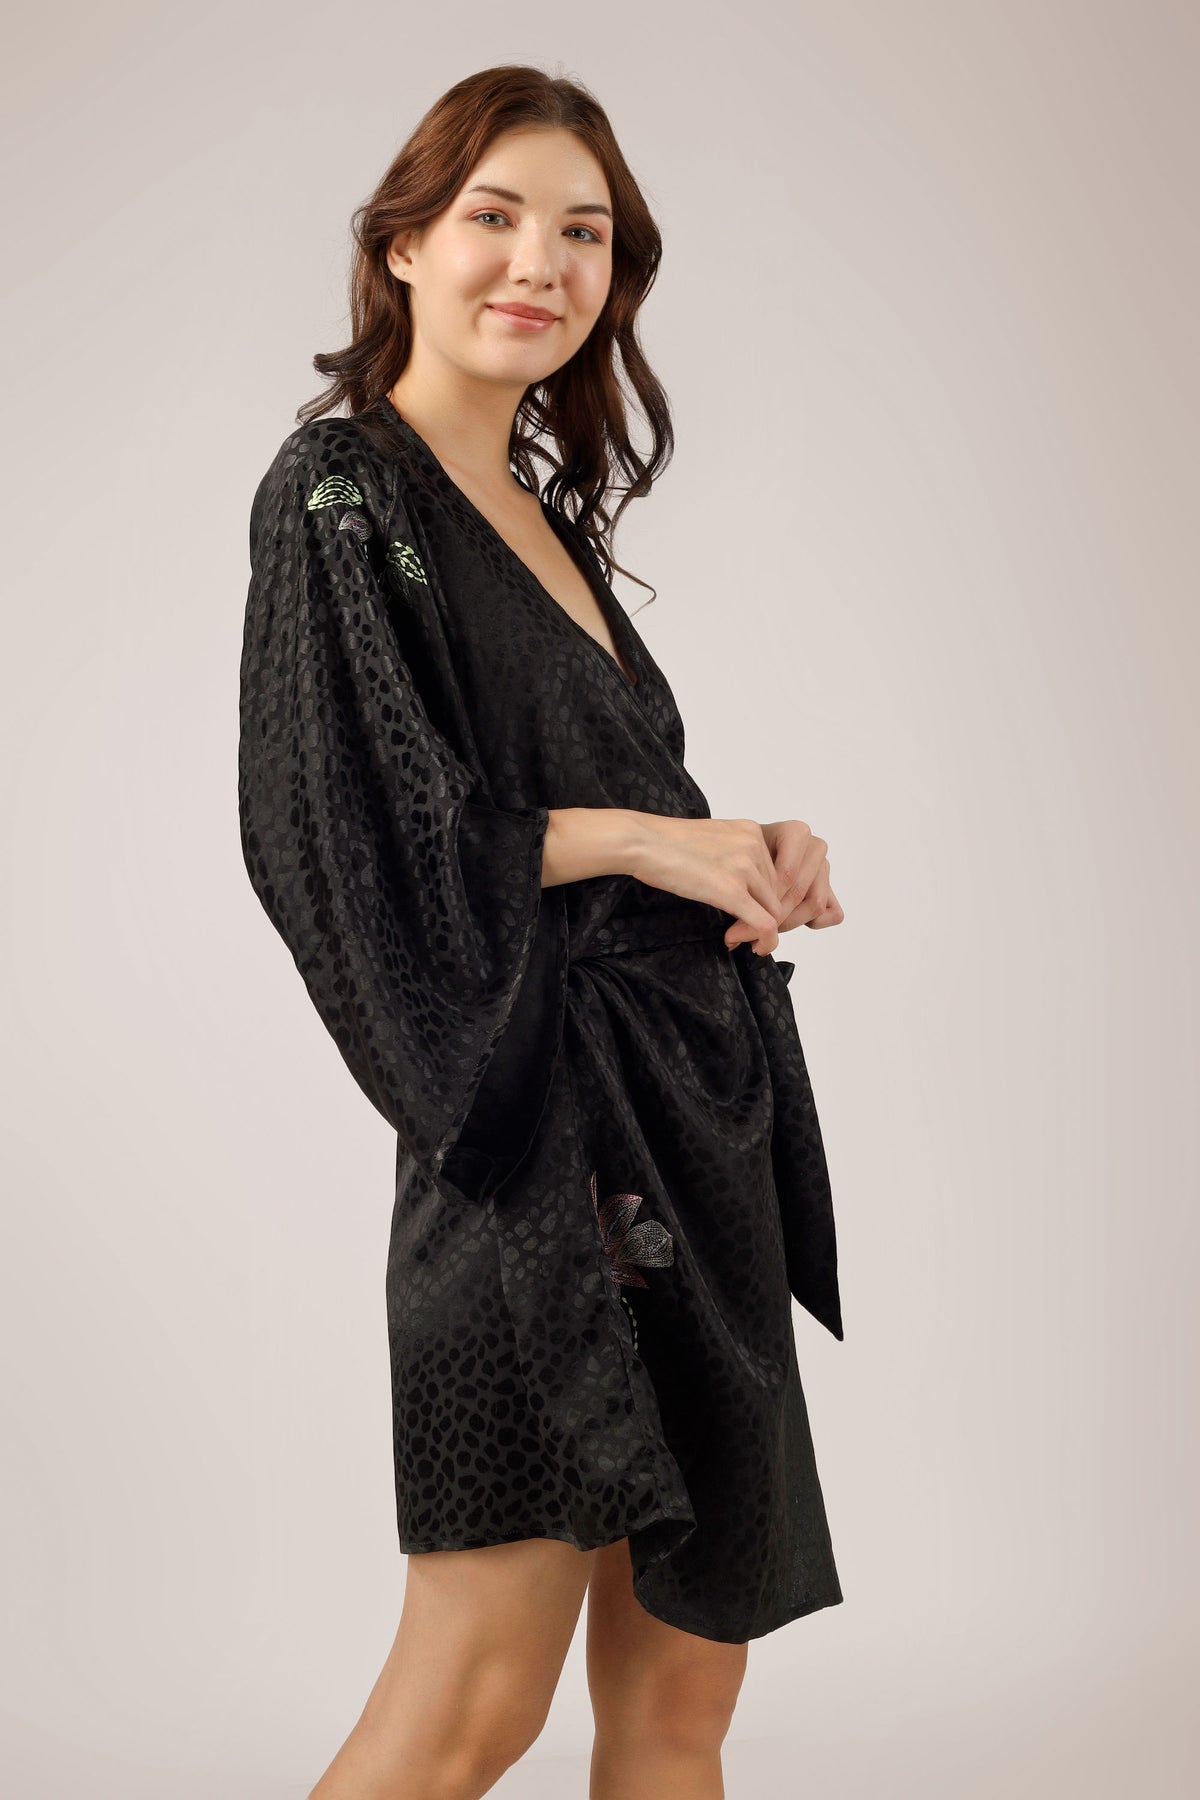 Lola, Dressing Gown/Robe